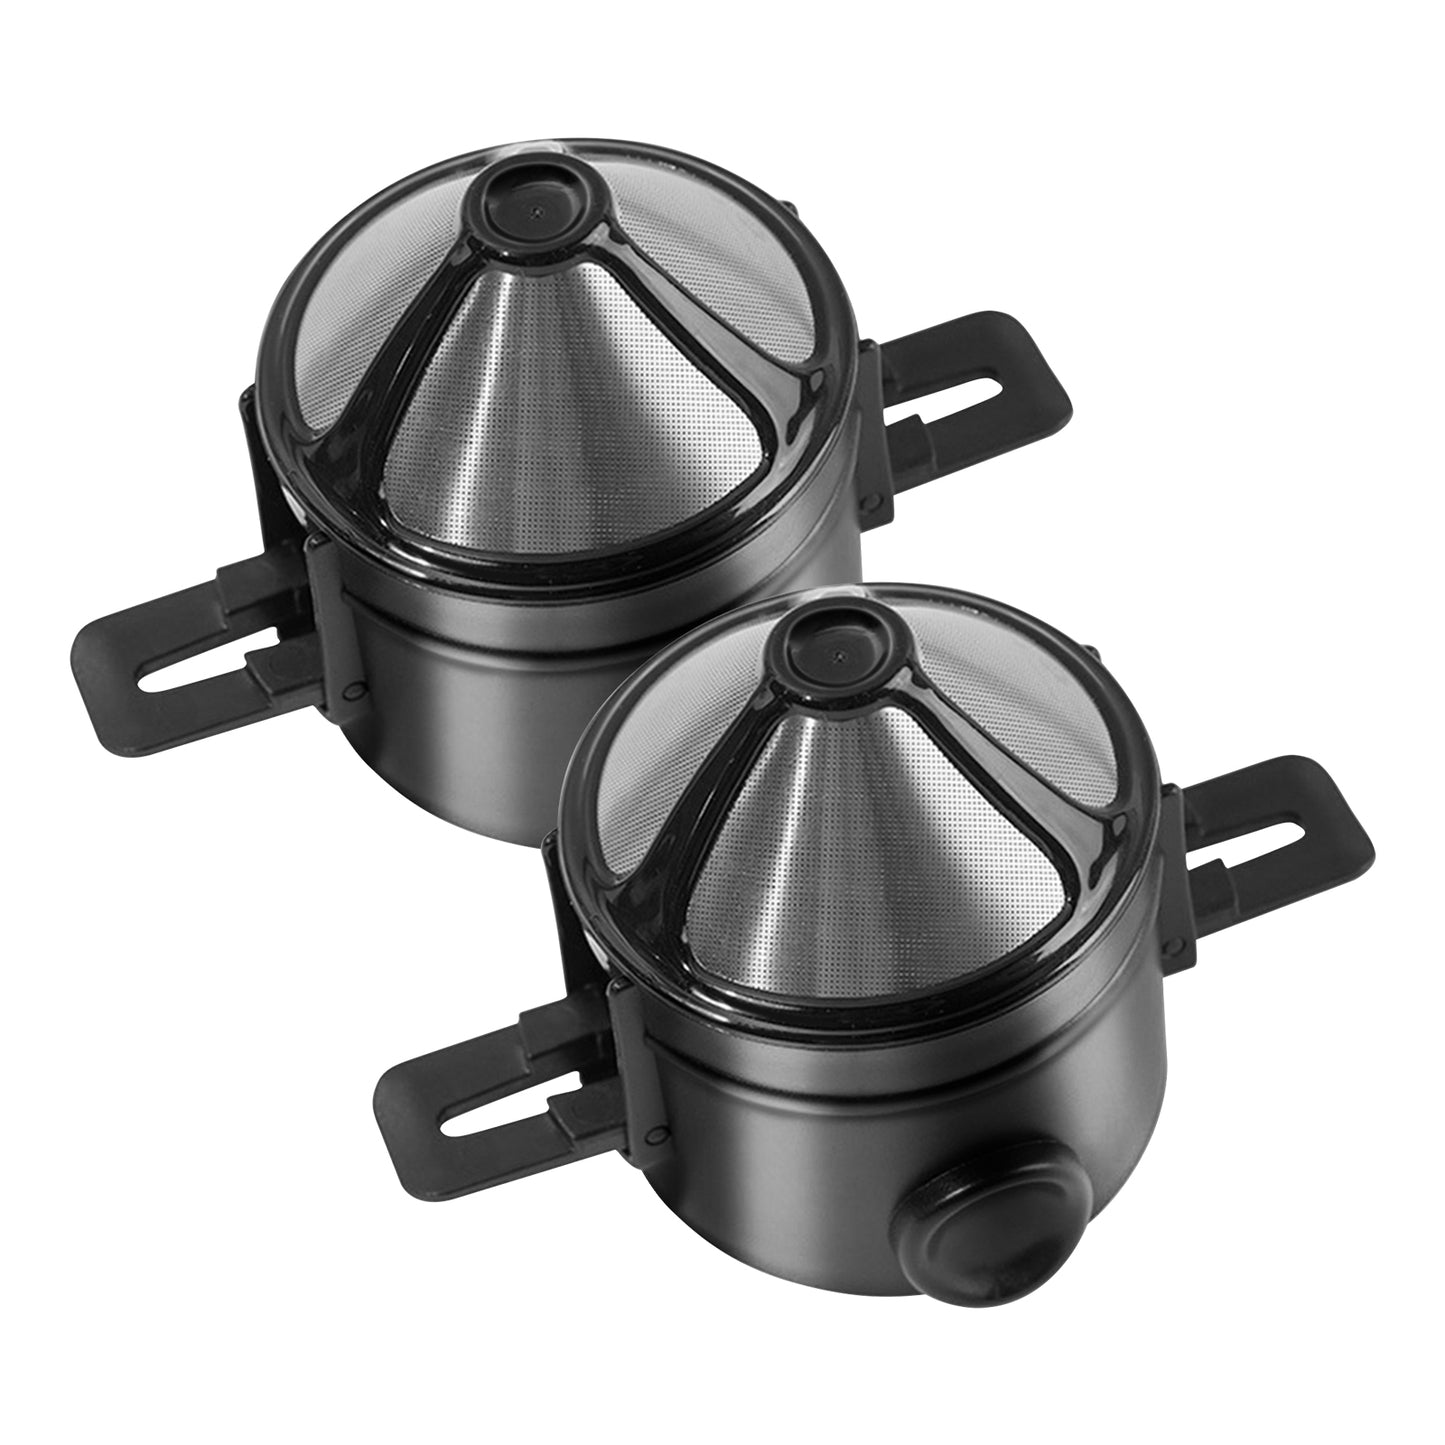 Stainless steel coffee filter